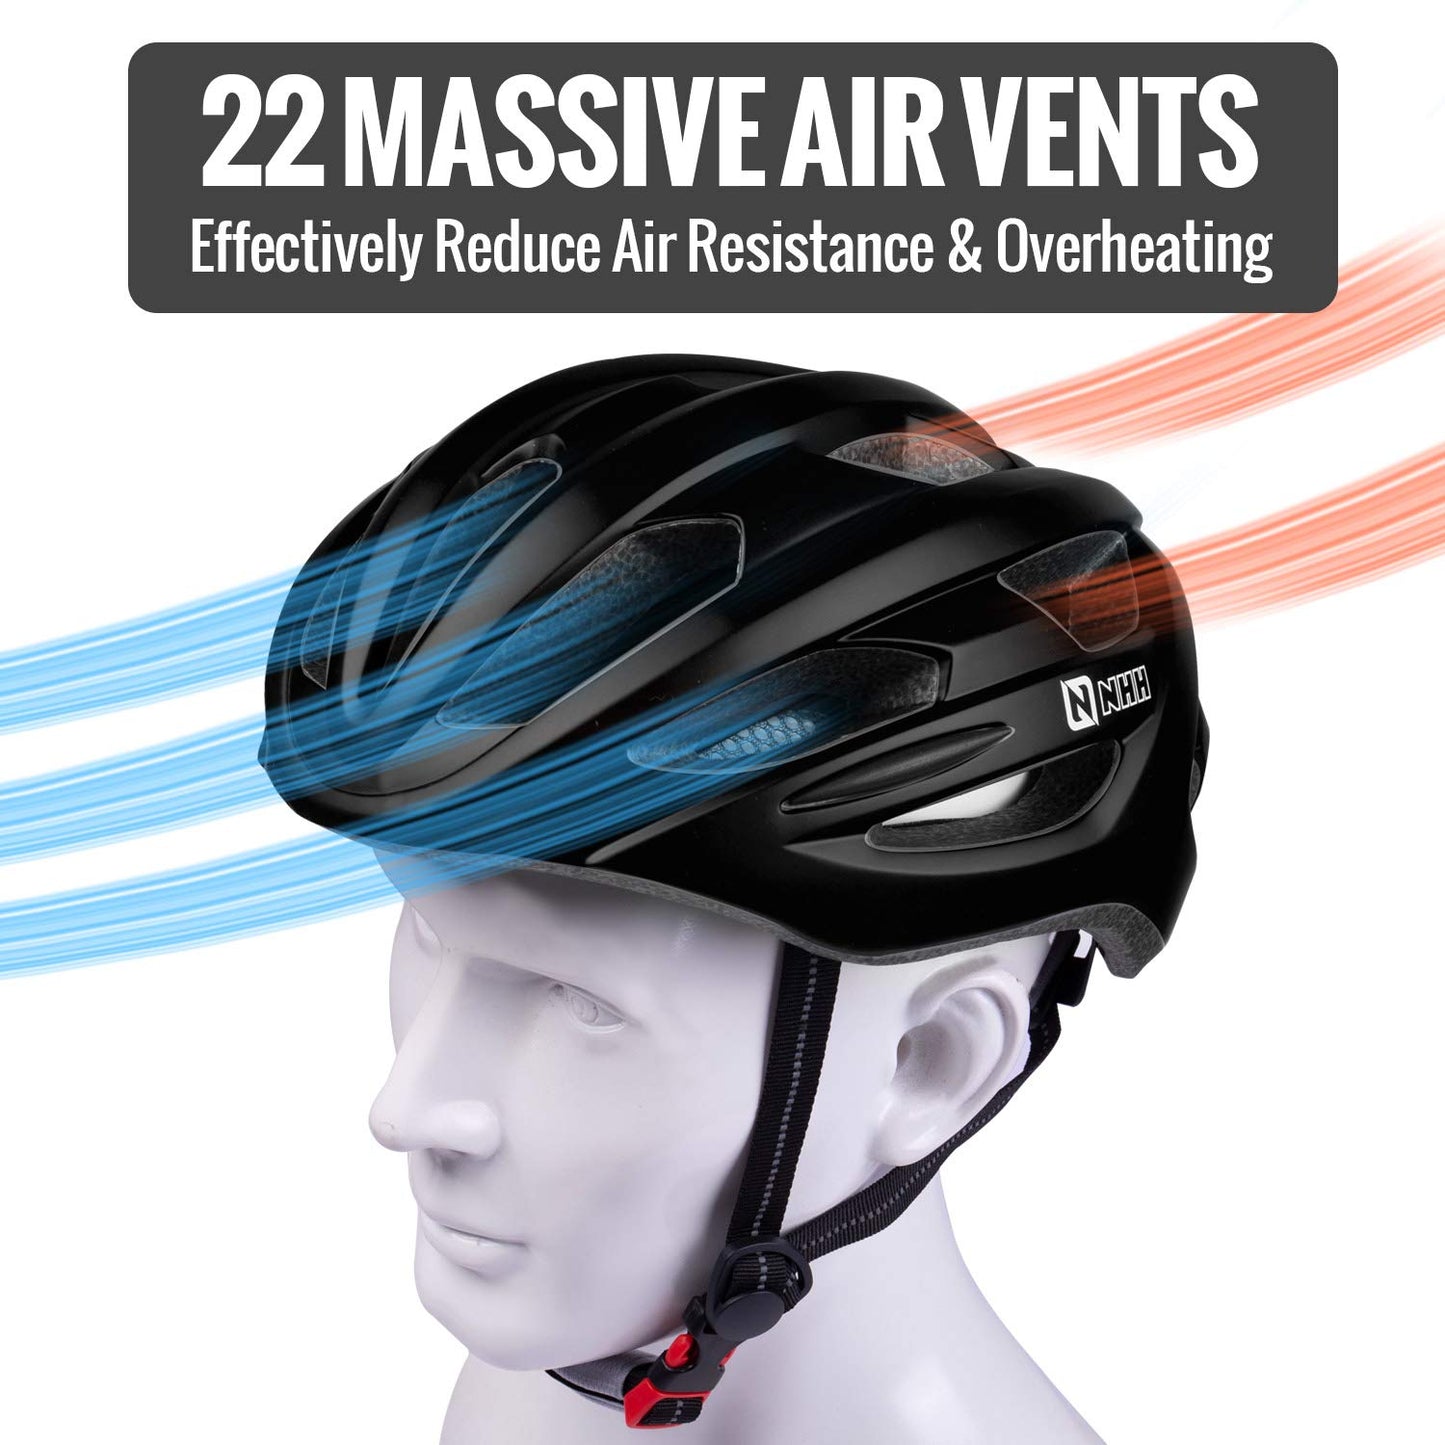 NHH Adult Bike Helmet - CPSC-Compliant Bicycle Cycling Helmet Lightweight Breathable and Adjustable Helmet for Men and Women Commuters and Road Cycling